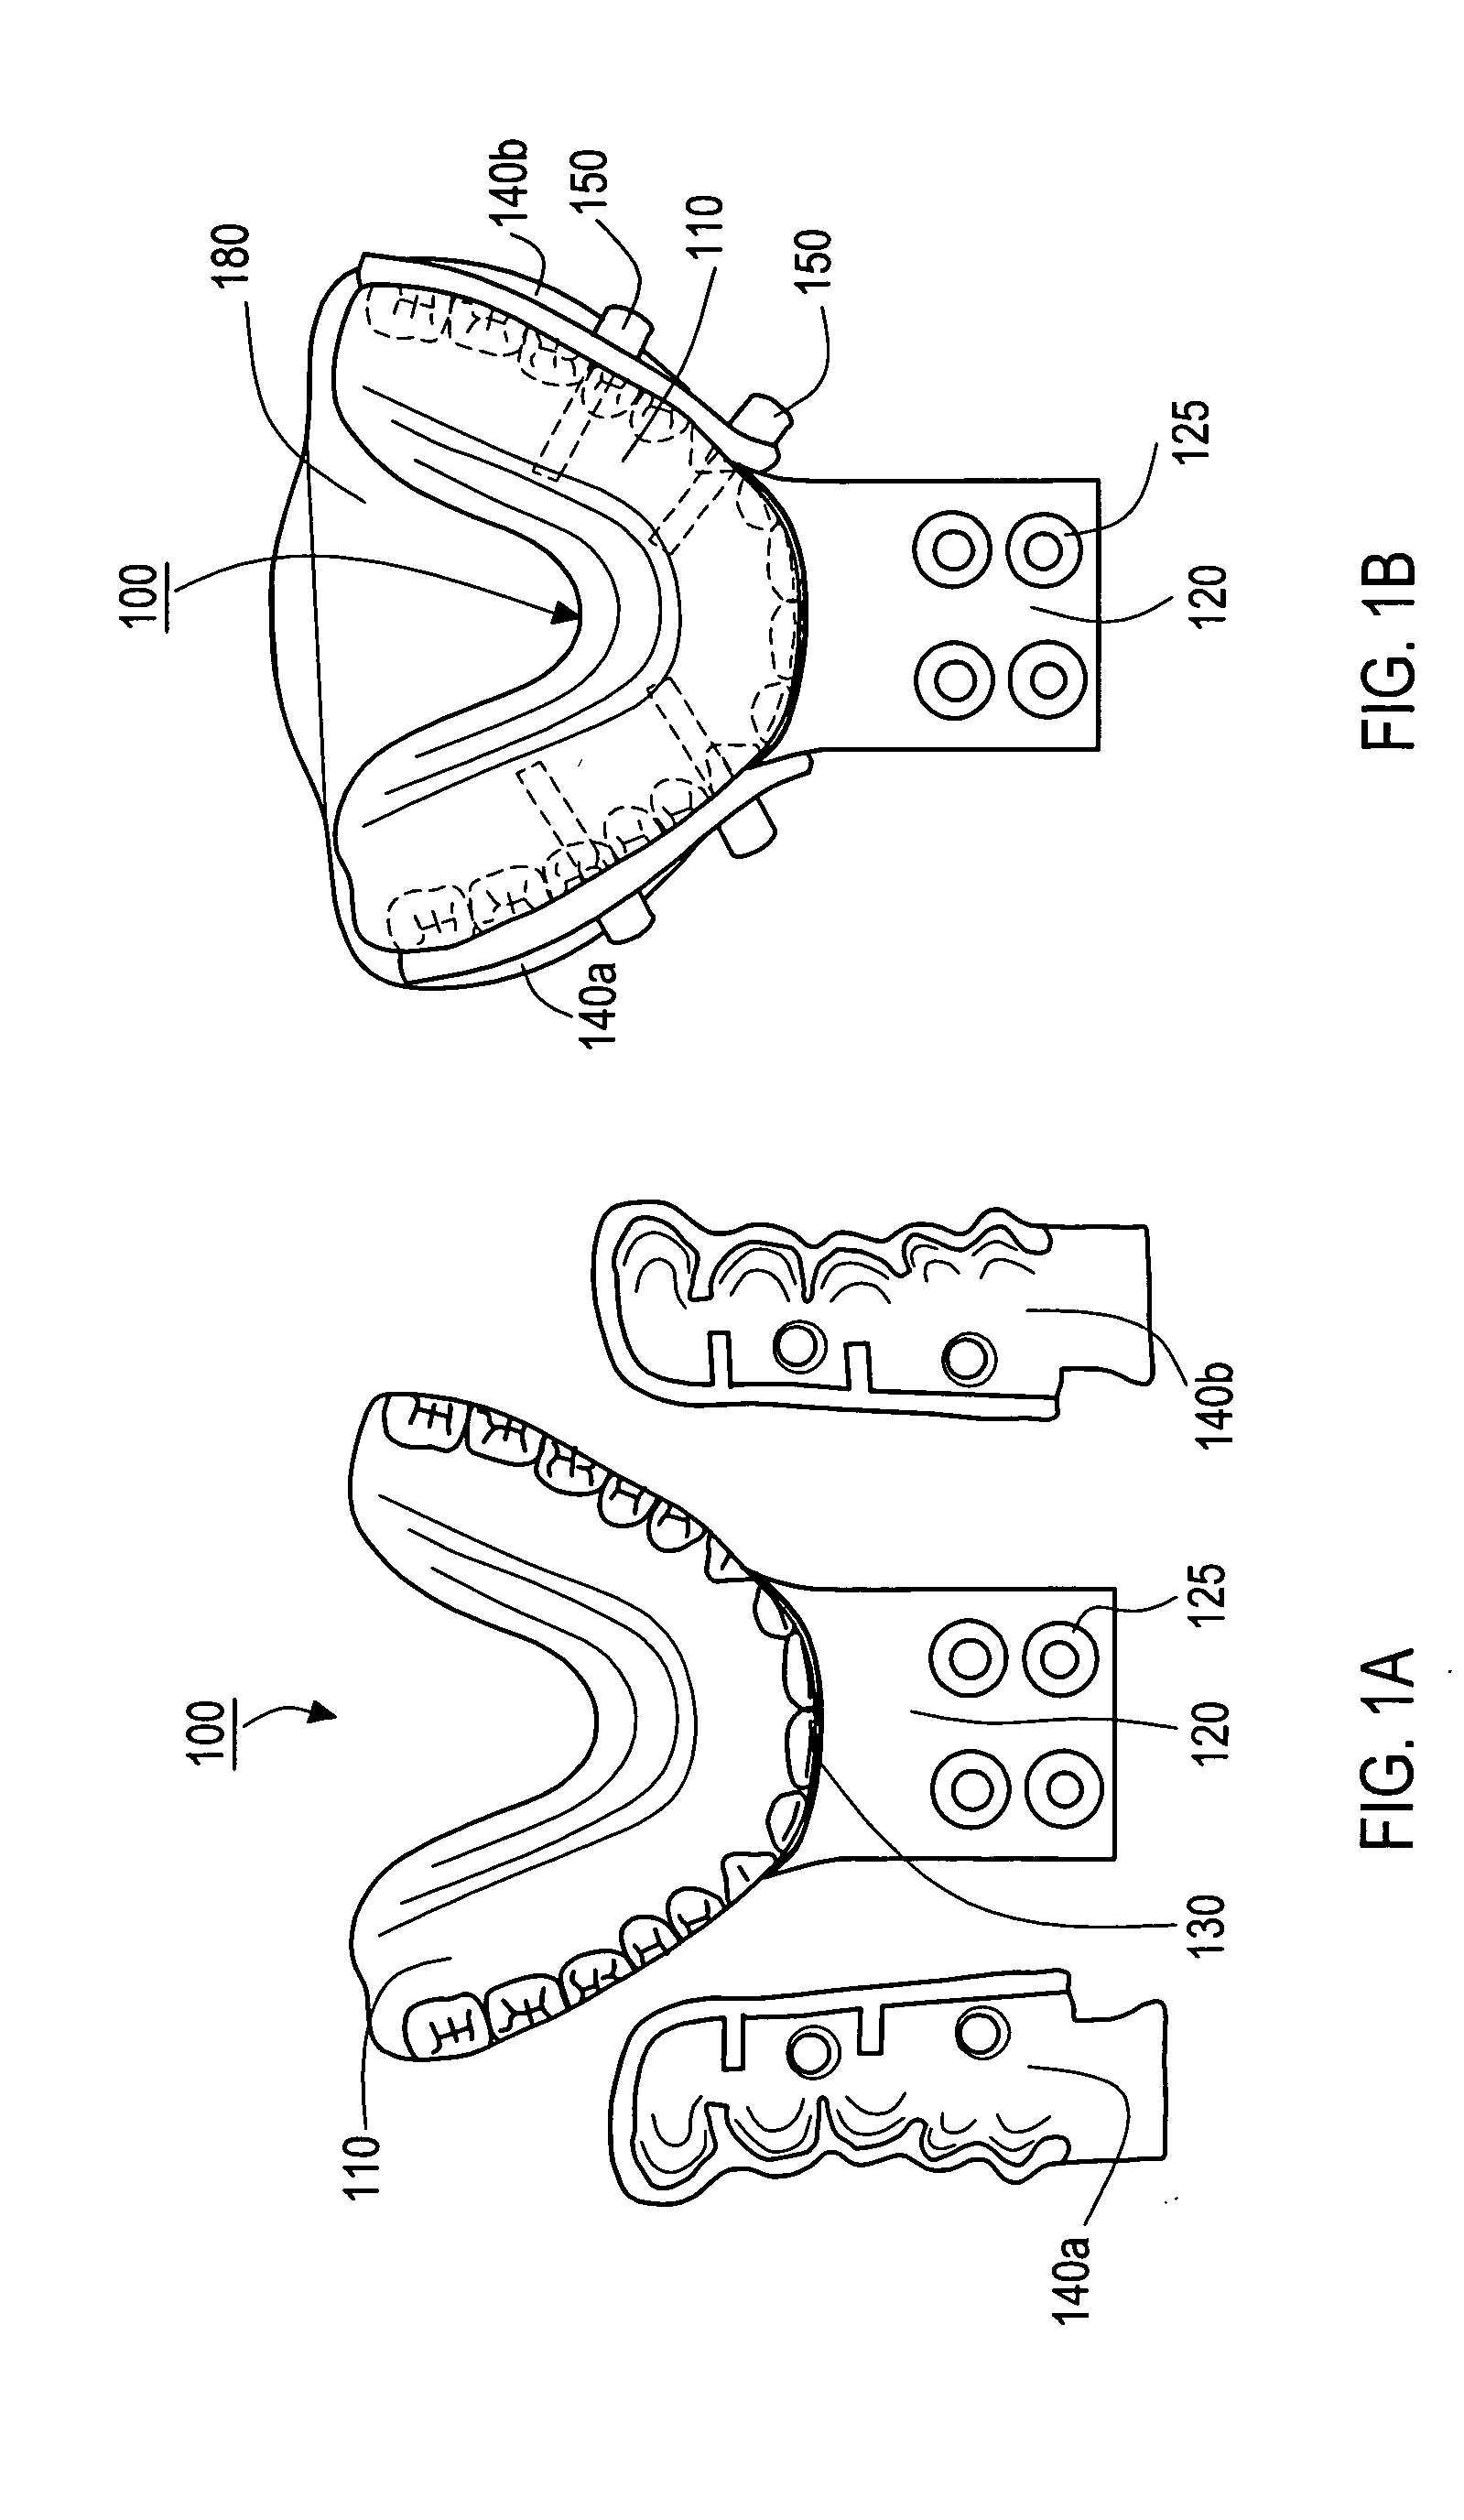 System and method for surgical instrument disablement via image-guided position feedback